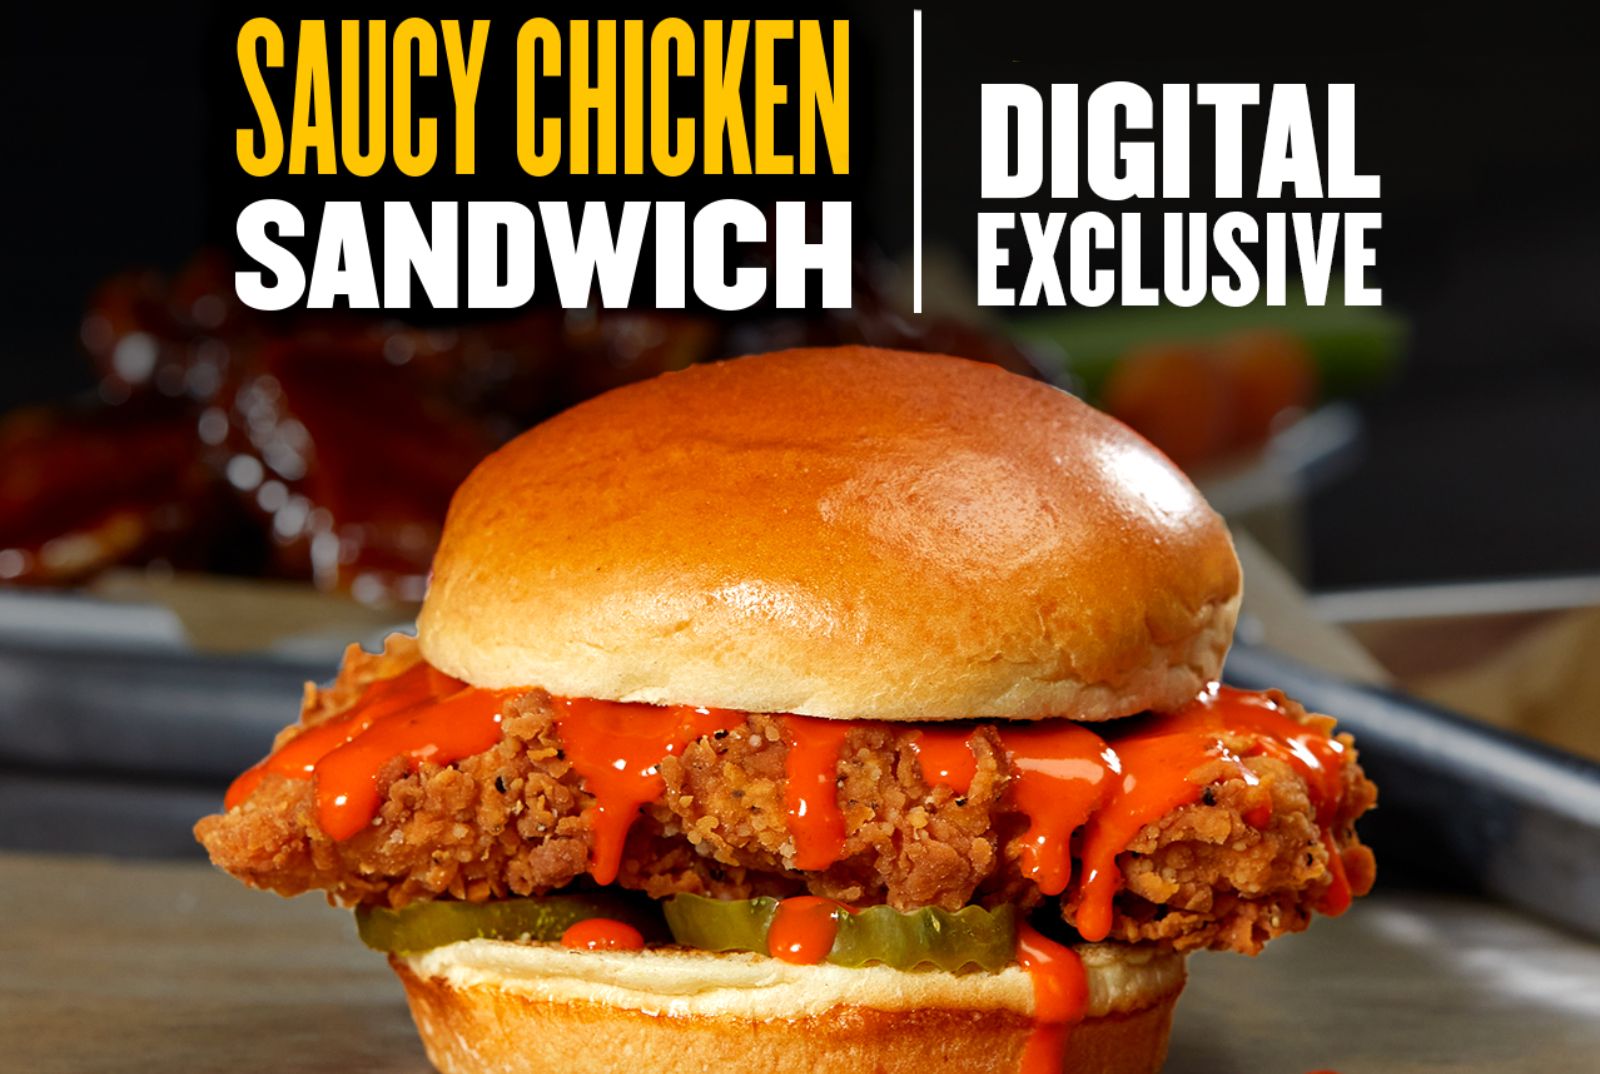 Get the New Saucy Chicken Sandwich for Only $5.99 with Your Next Online and In-app Order at Buffalo Wild Wings